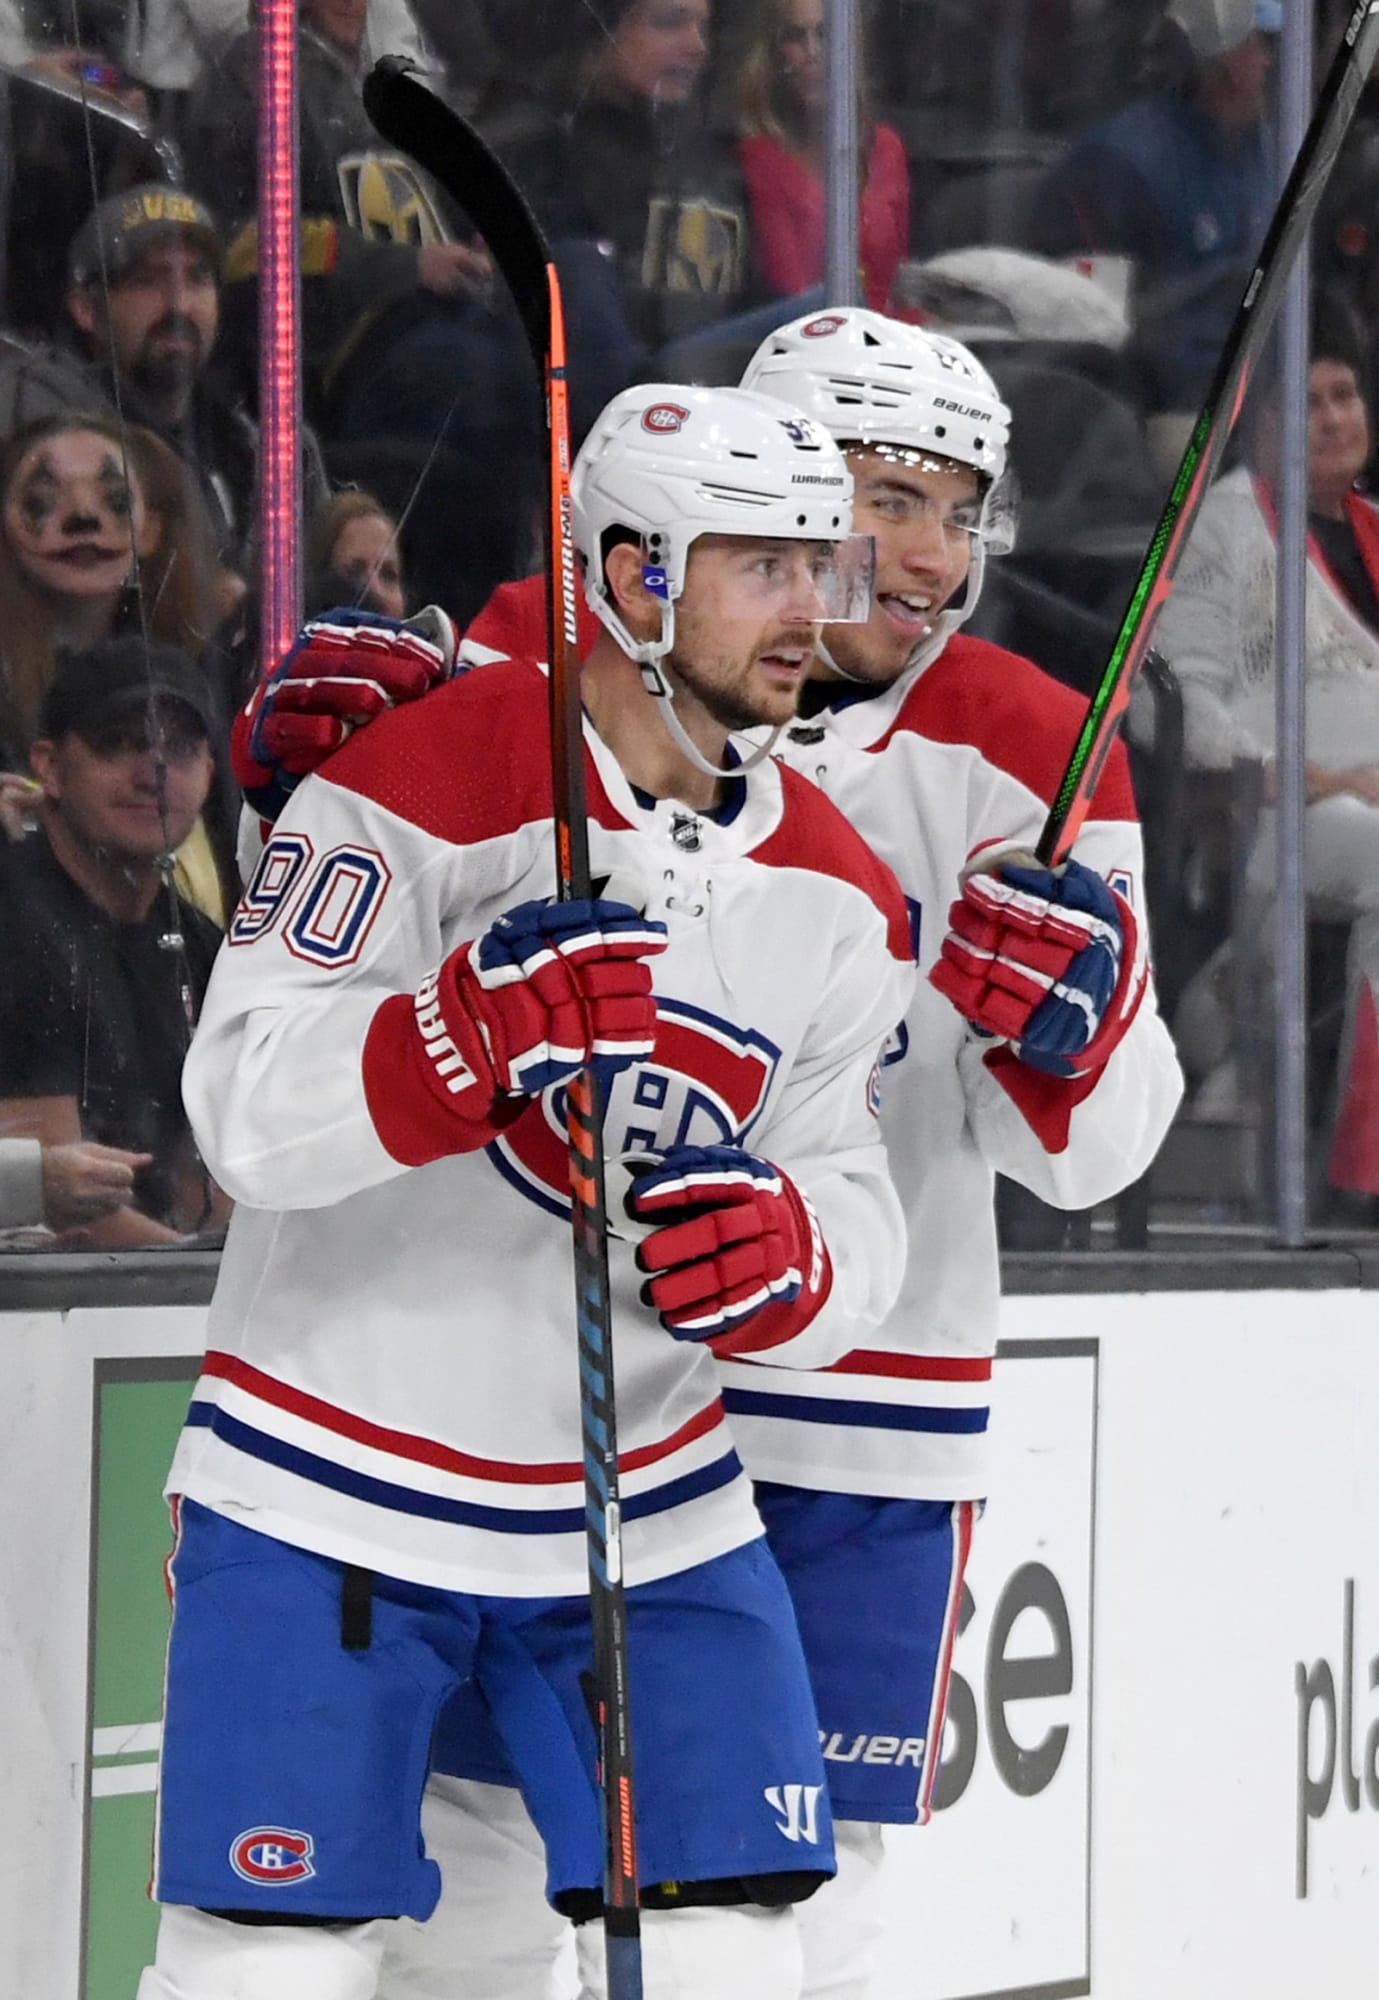 The Montreal Canadiens should break up the top line